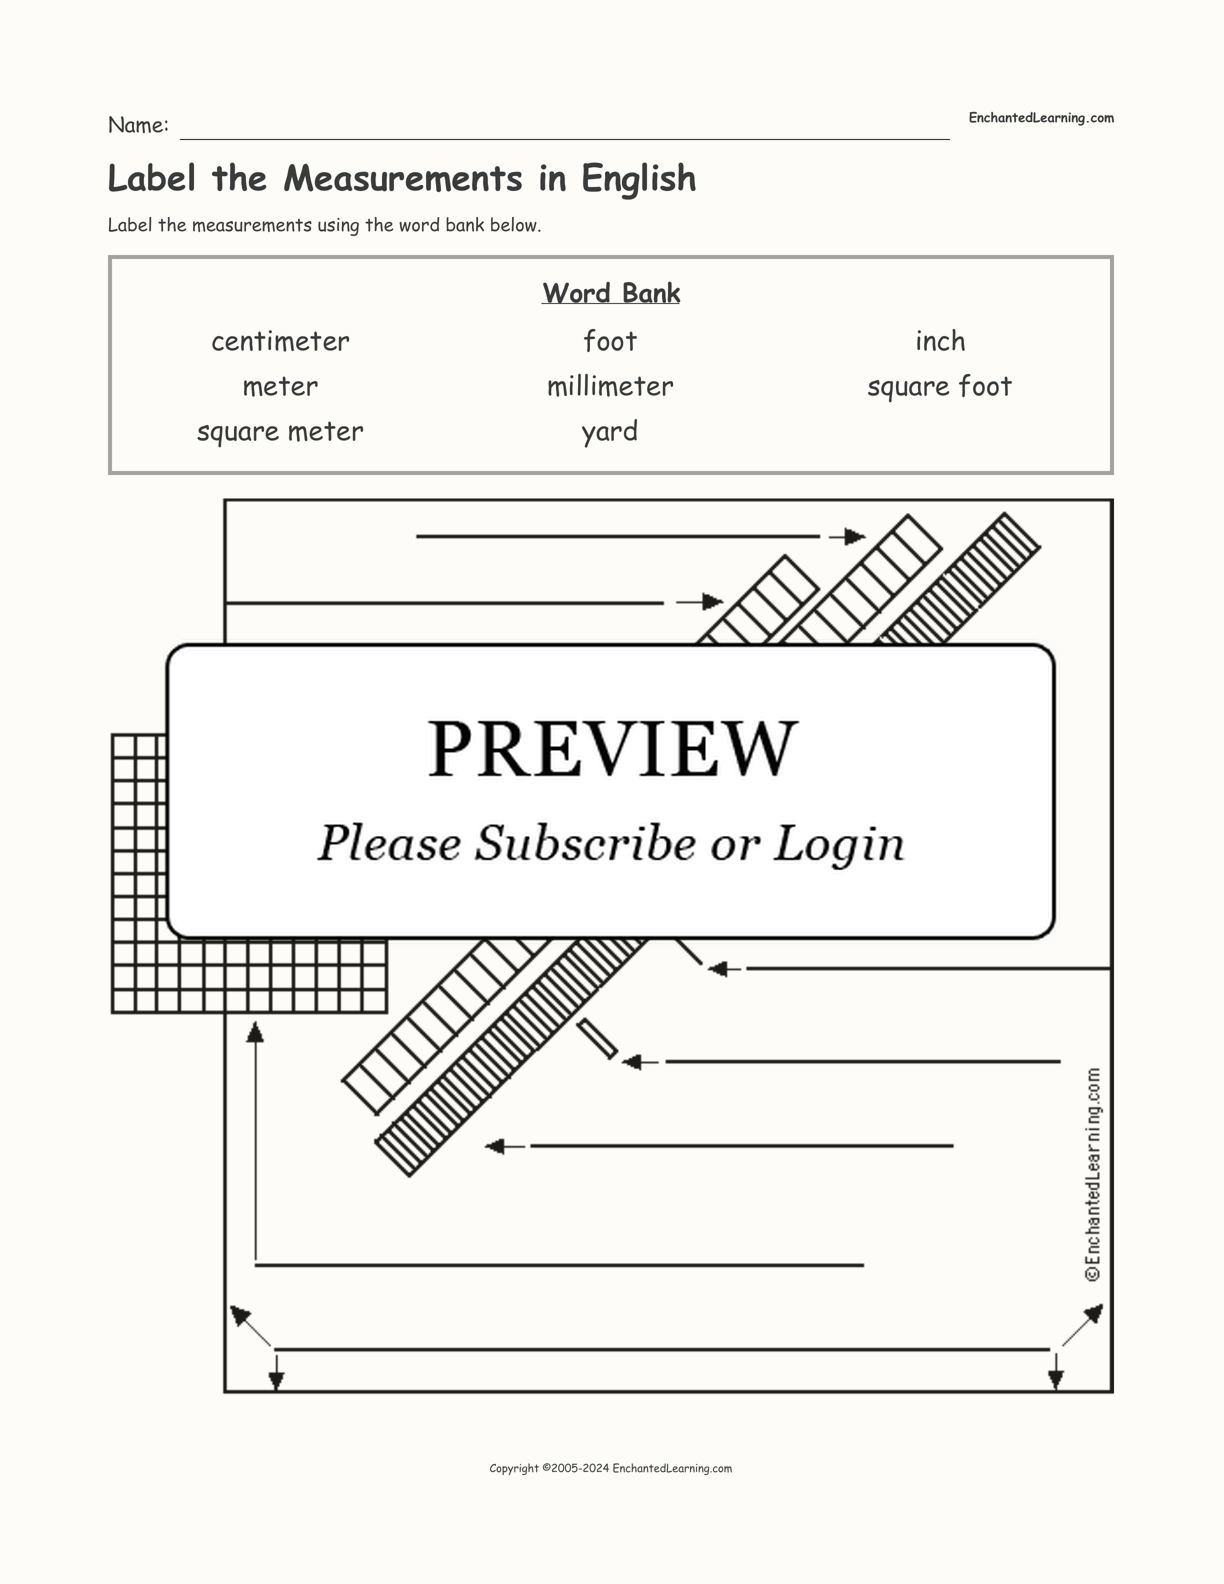 Label the Measurements in English interactive worksheet page 1